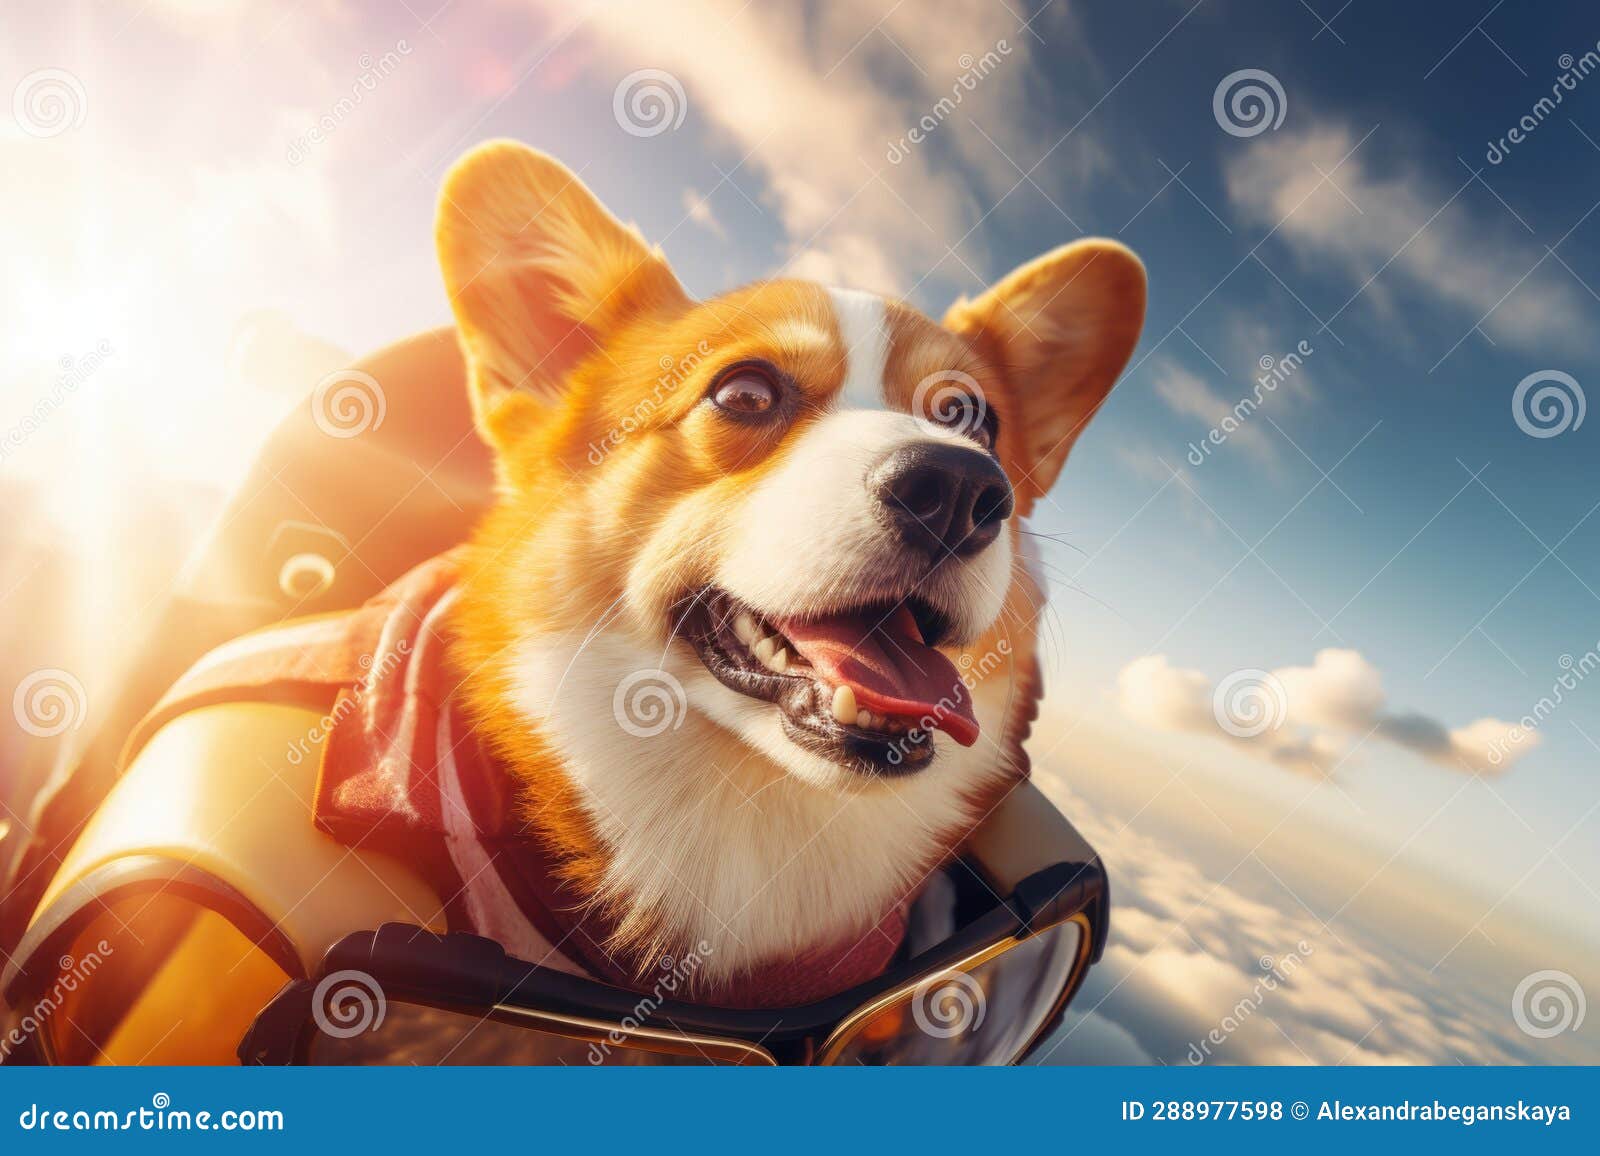 A Corgi Dog is Flying on a Plane with a Backpack Stock Photo - Image of ...